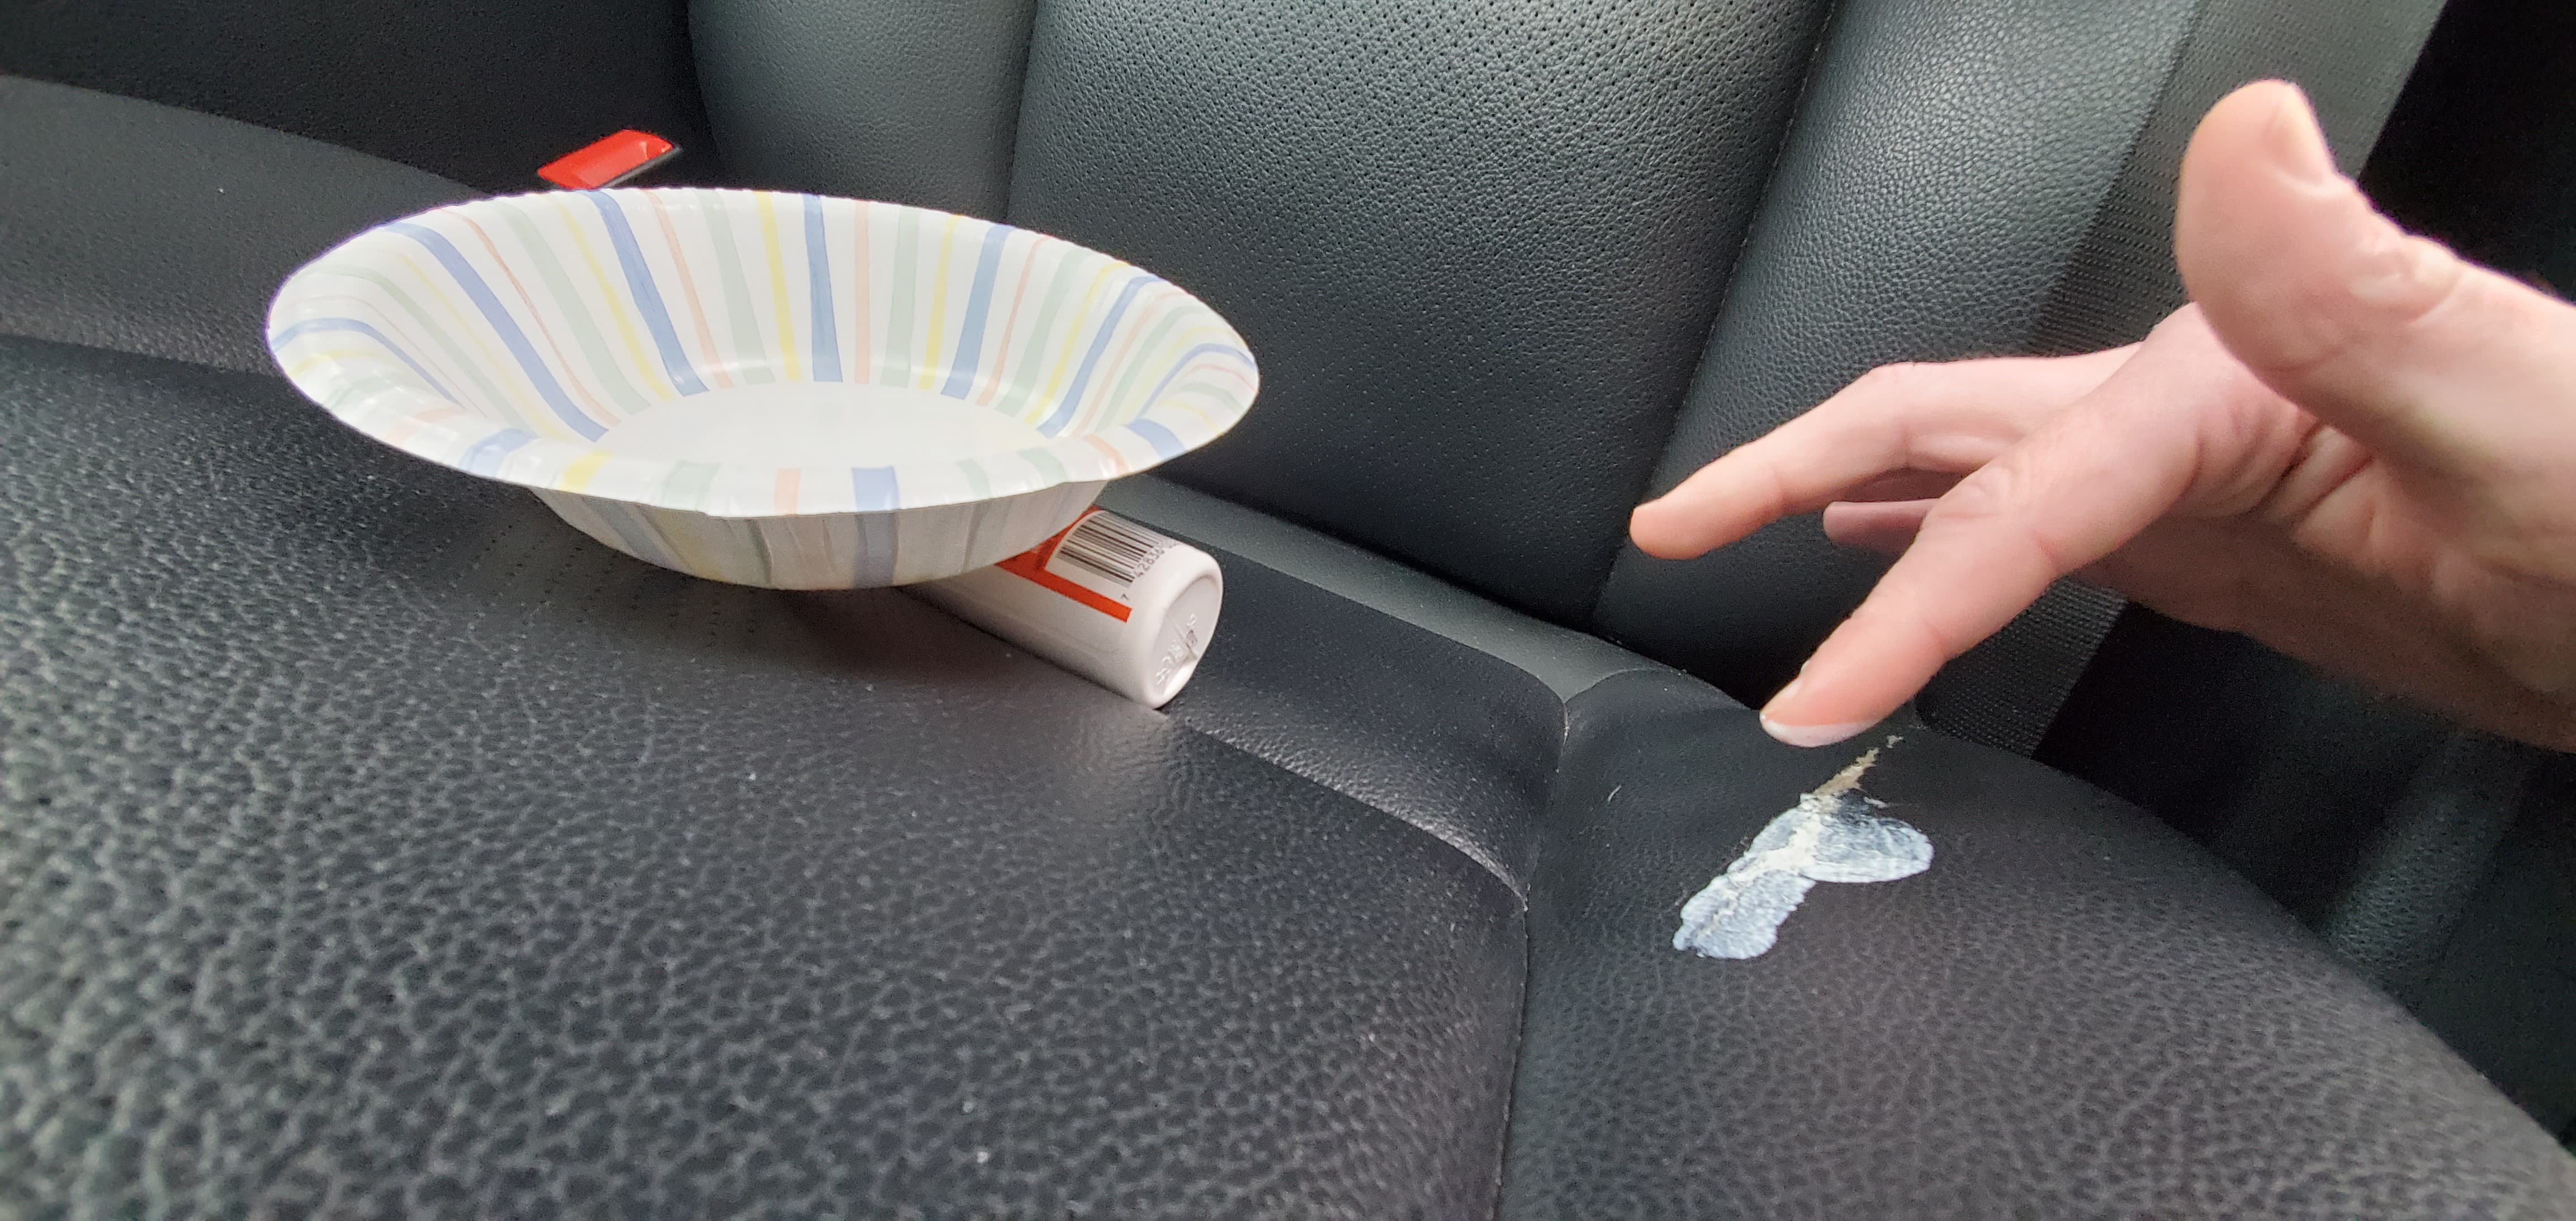 How To Repair A Leather Car Seat - How To Fix Rip In Vinyl Car Seat